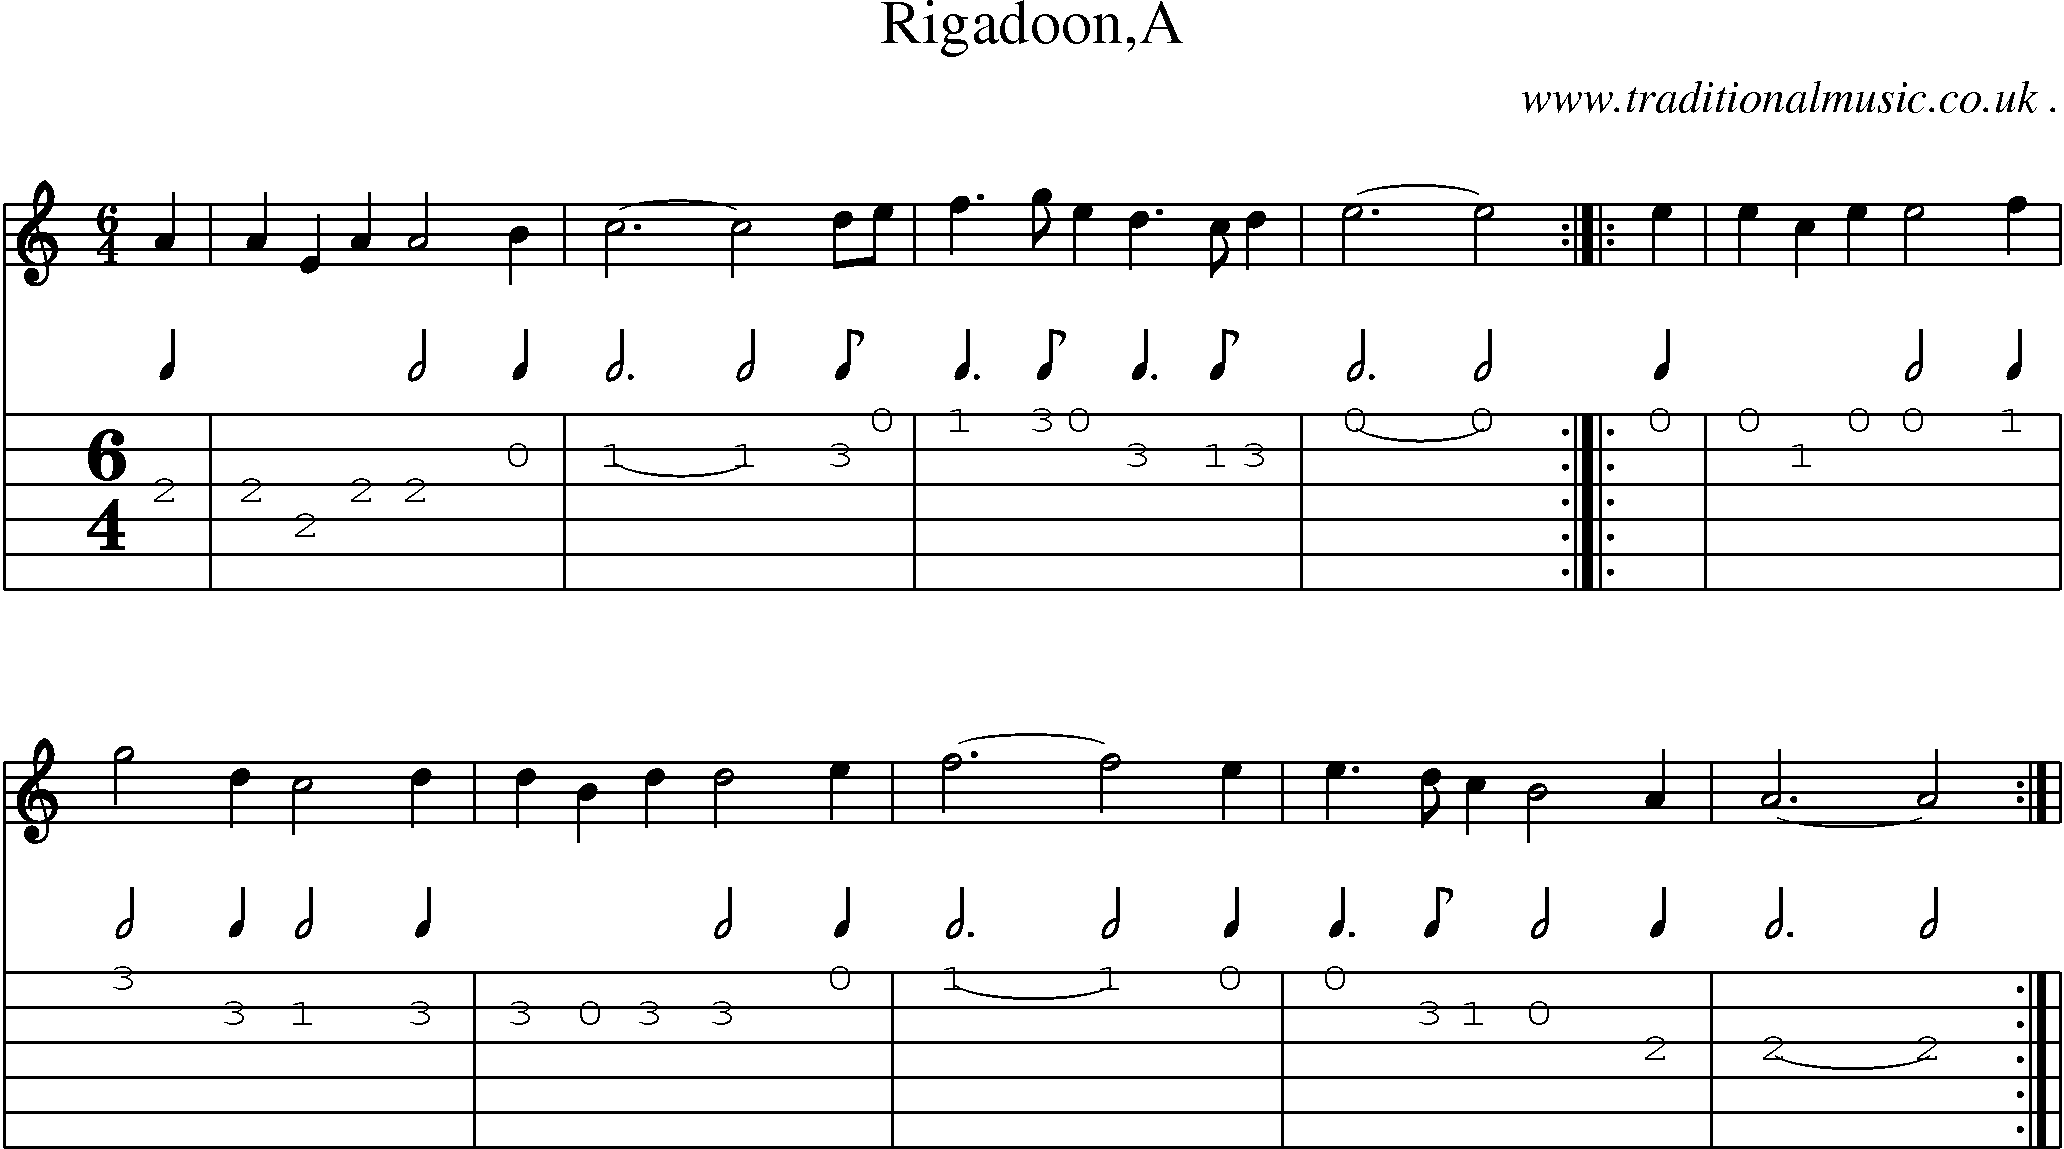 Sheet-Music and Guitar Tabs for Rigadoona